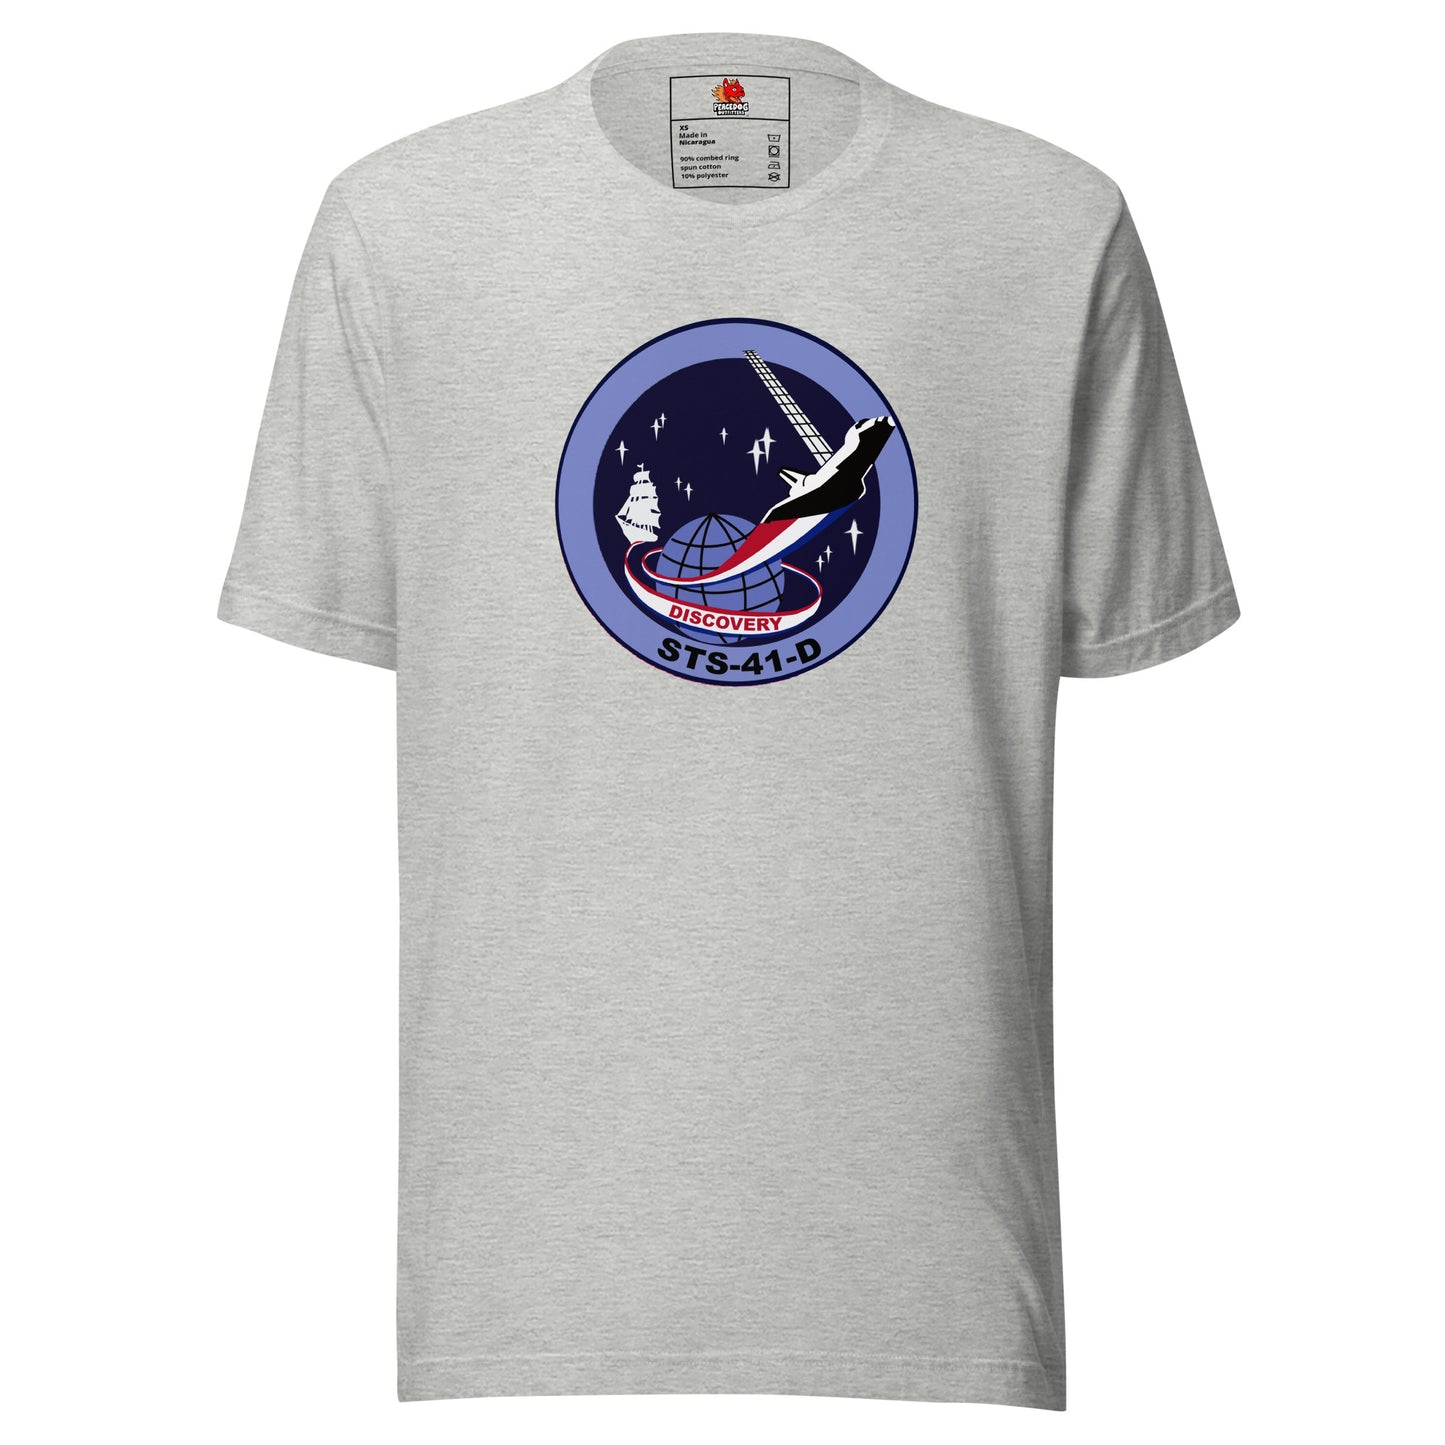 NASA Space Shuttle Mission Patch STS-41-D T-shirt